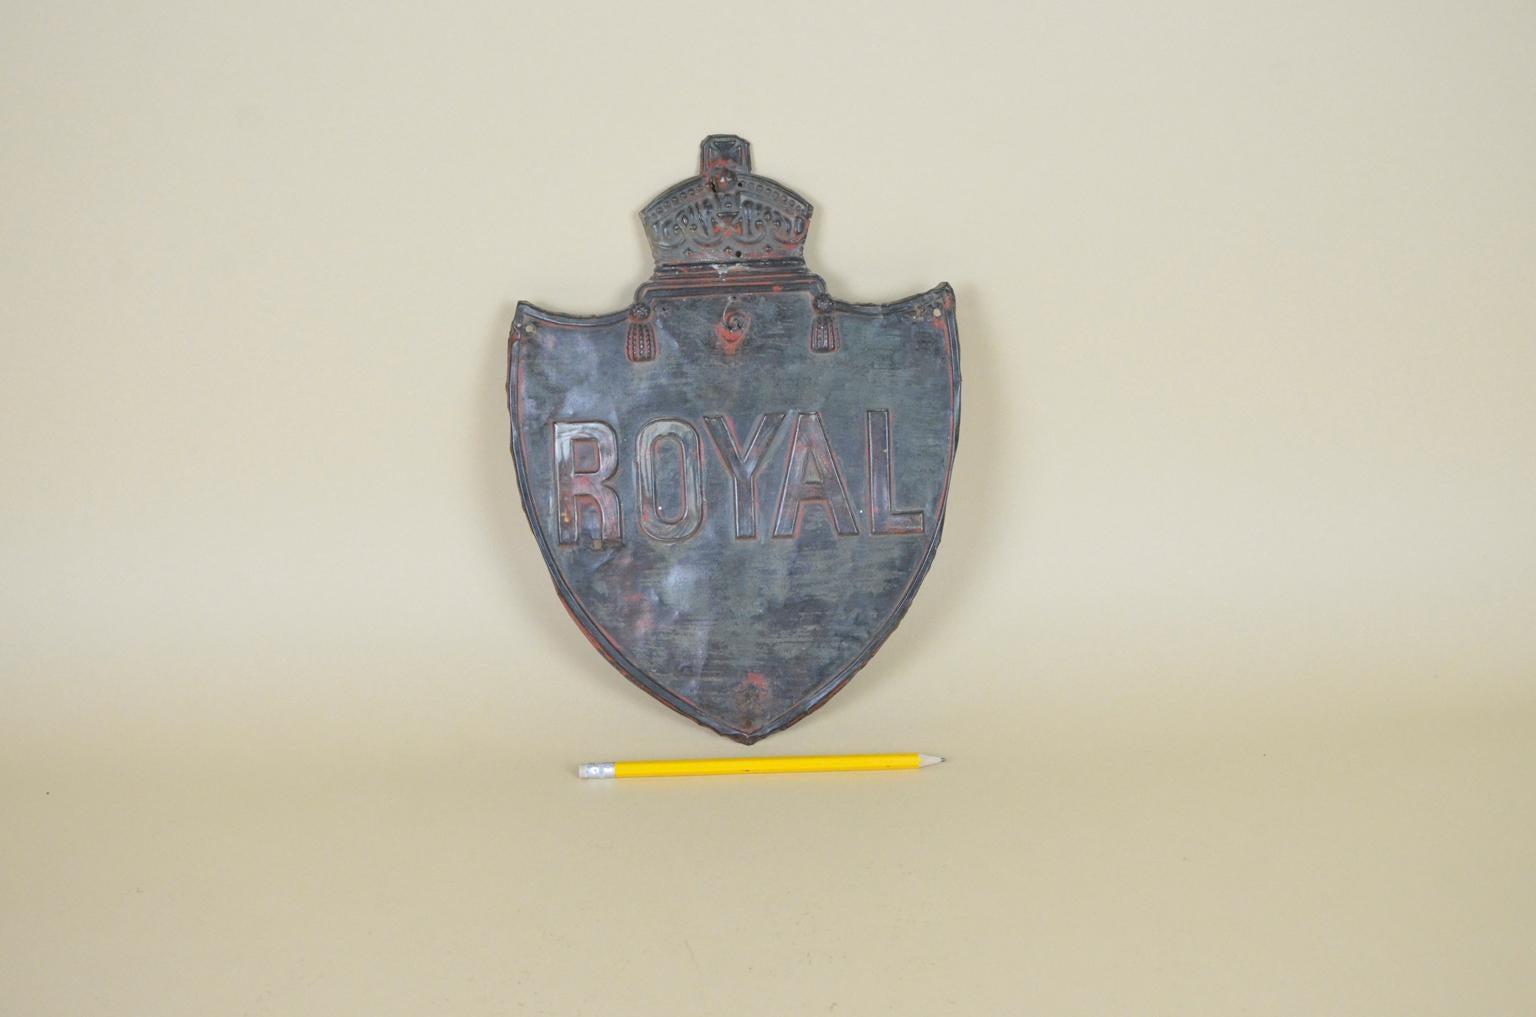 Royal Insurance second half of the 19th century copper fire plaque made in England.

Collector's note:

The Royal Insurance Company—now RSA Insurance Group —was formed in the United Kingdom in 1845. With six principal operating companies, it is